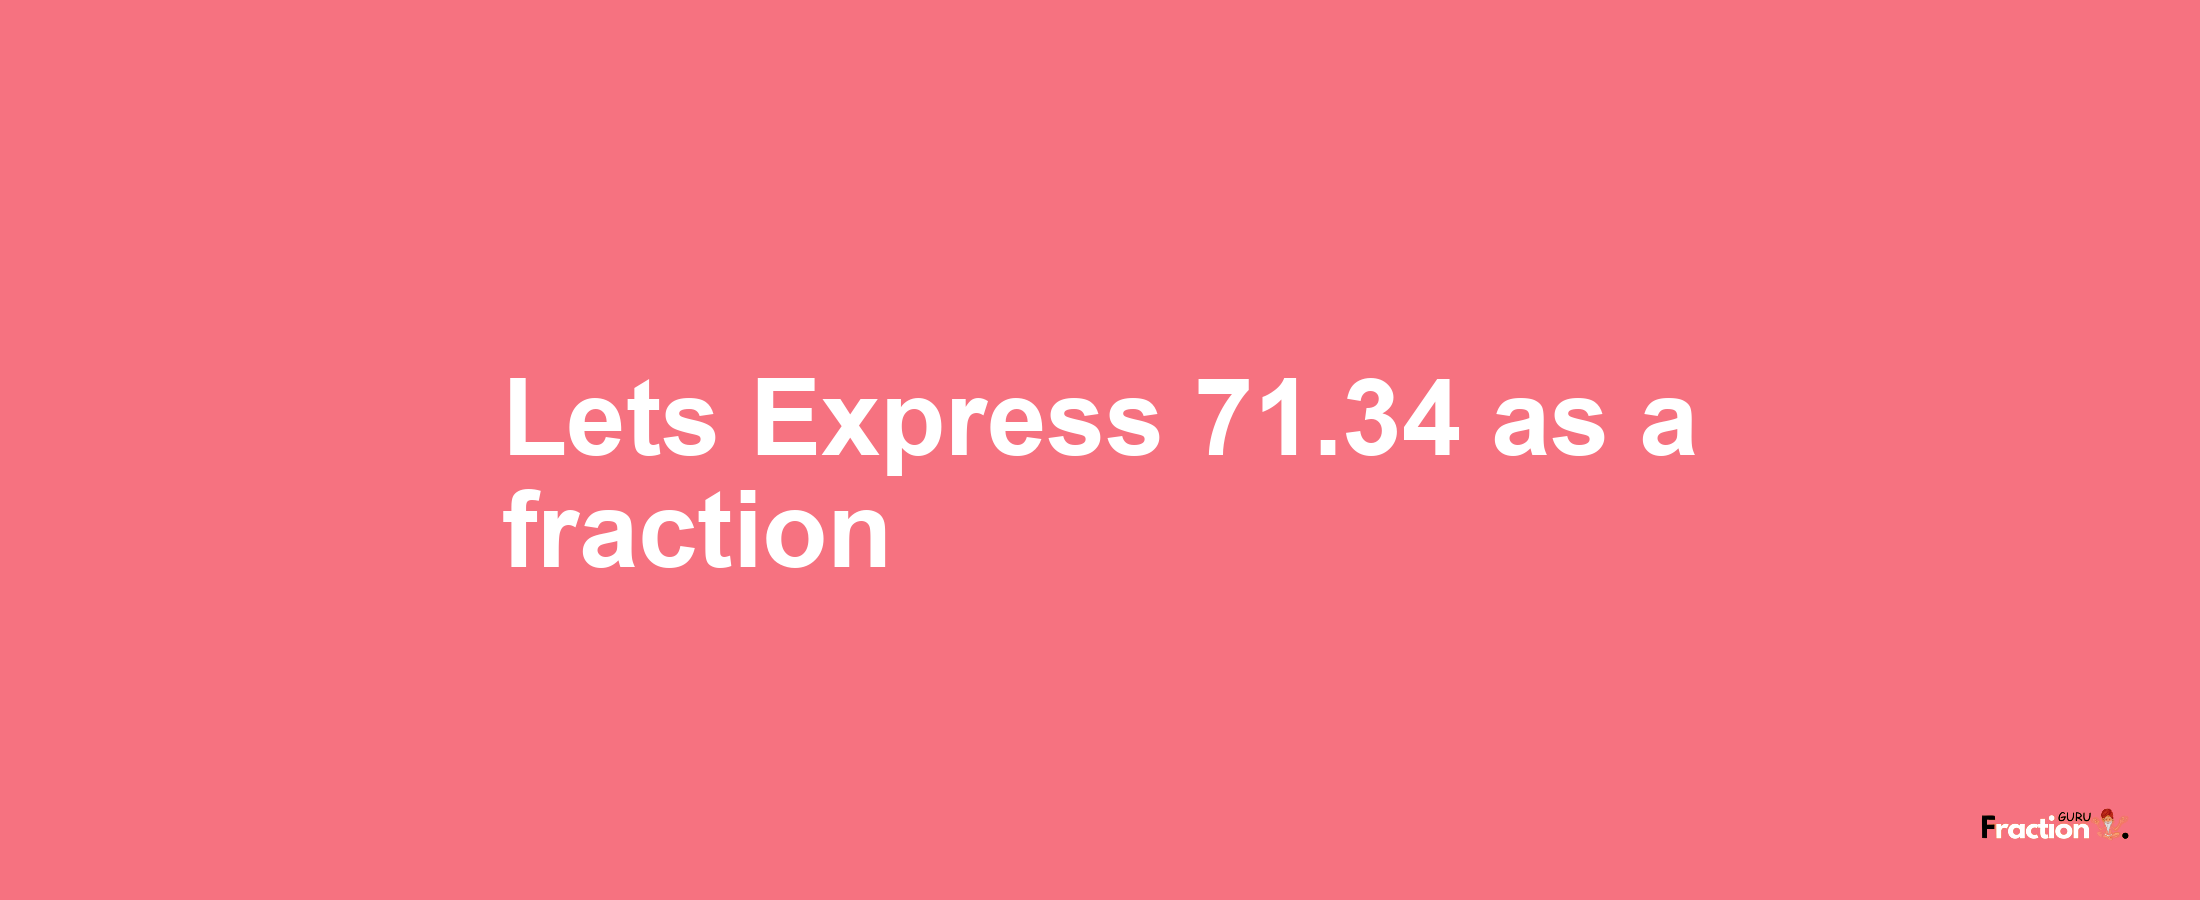 Lets Express 71.34 as afraction